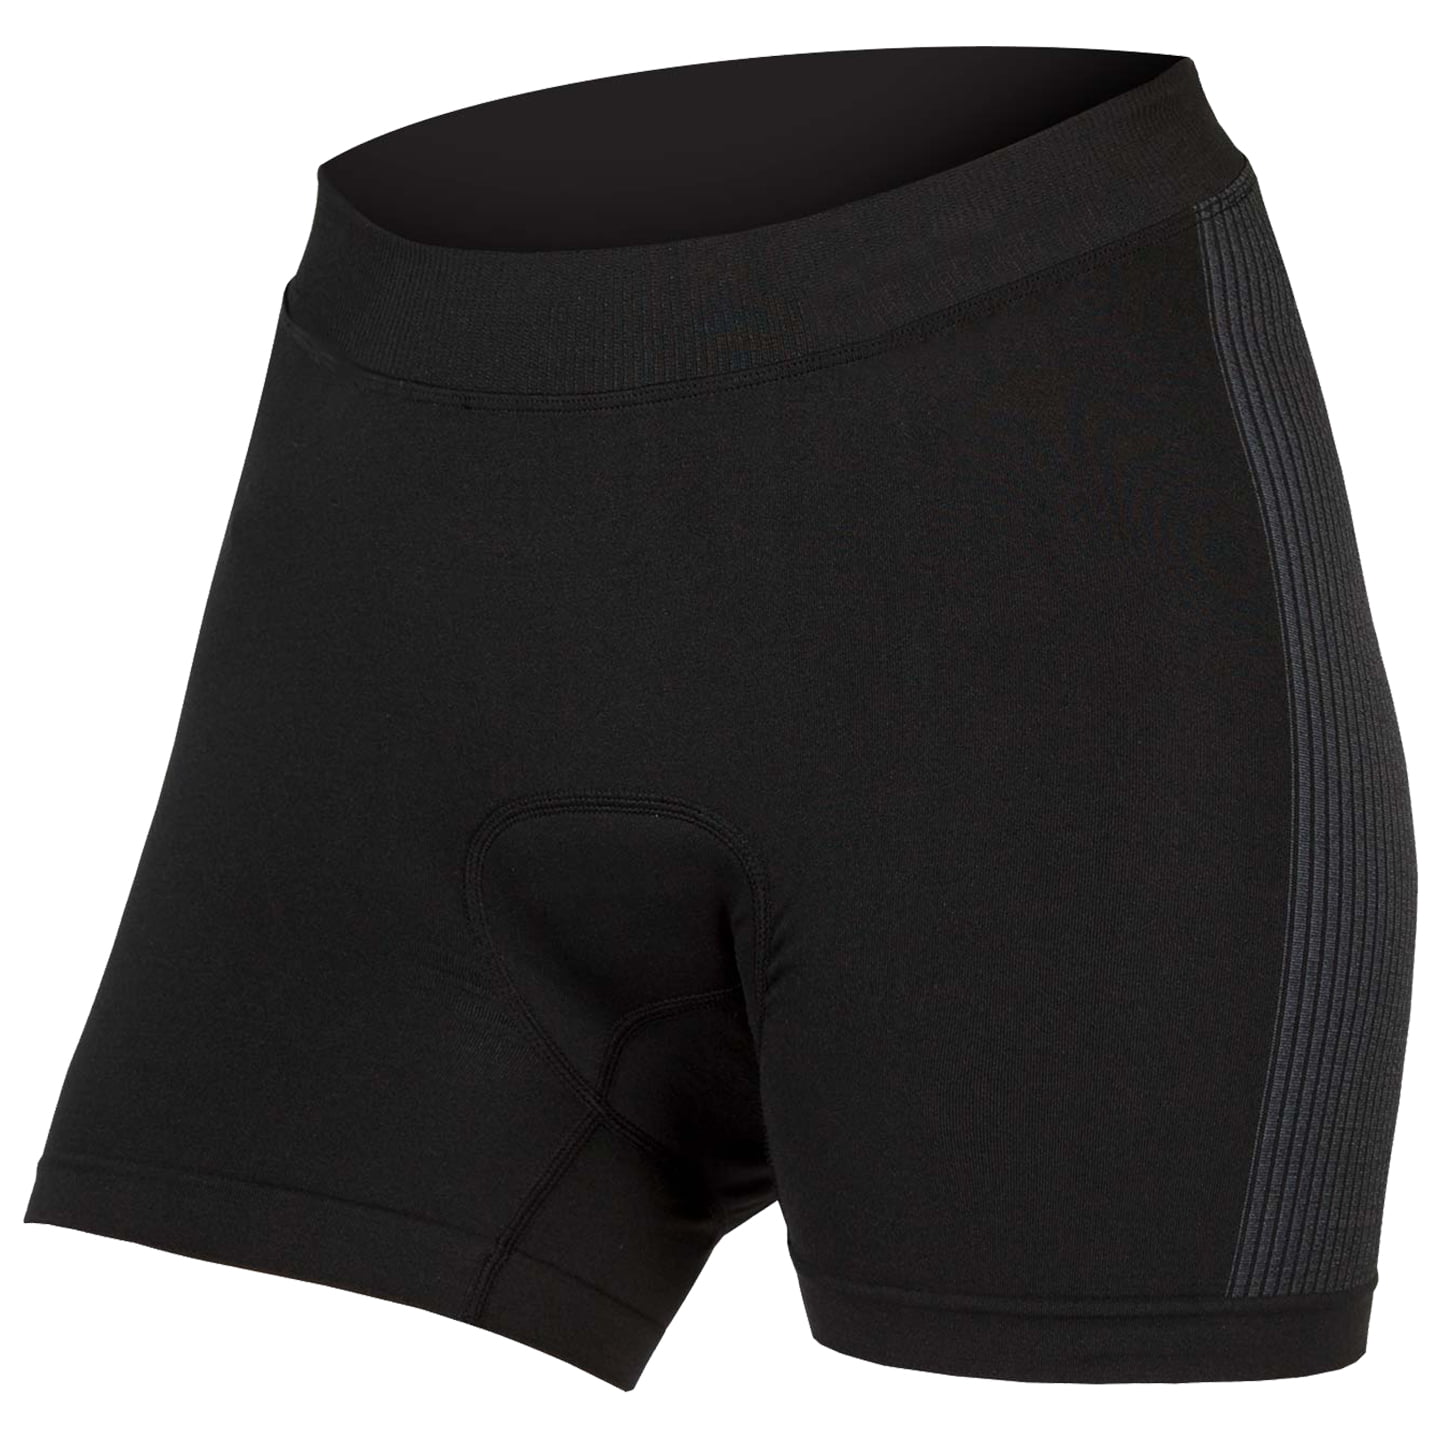 Women’s Padded Boxer Shorts, size S, Briefs, Cycling clothing